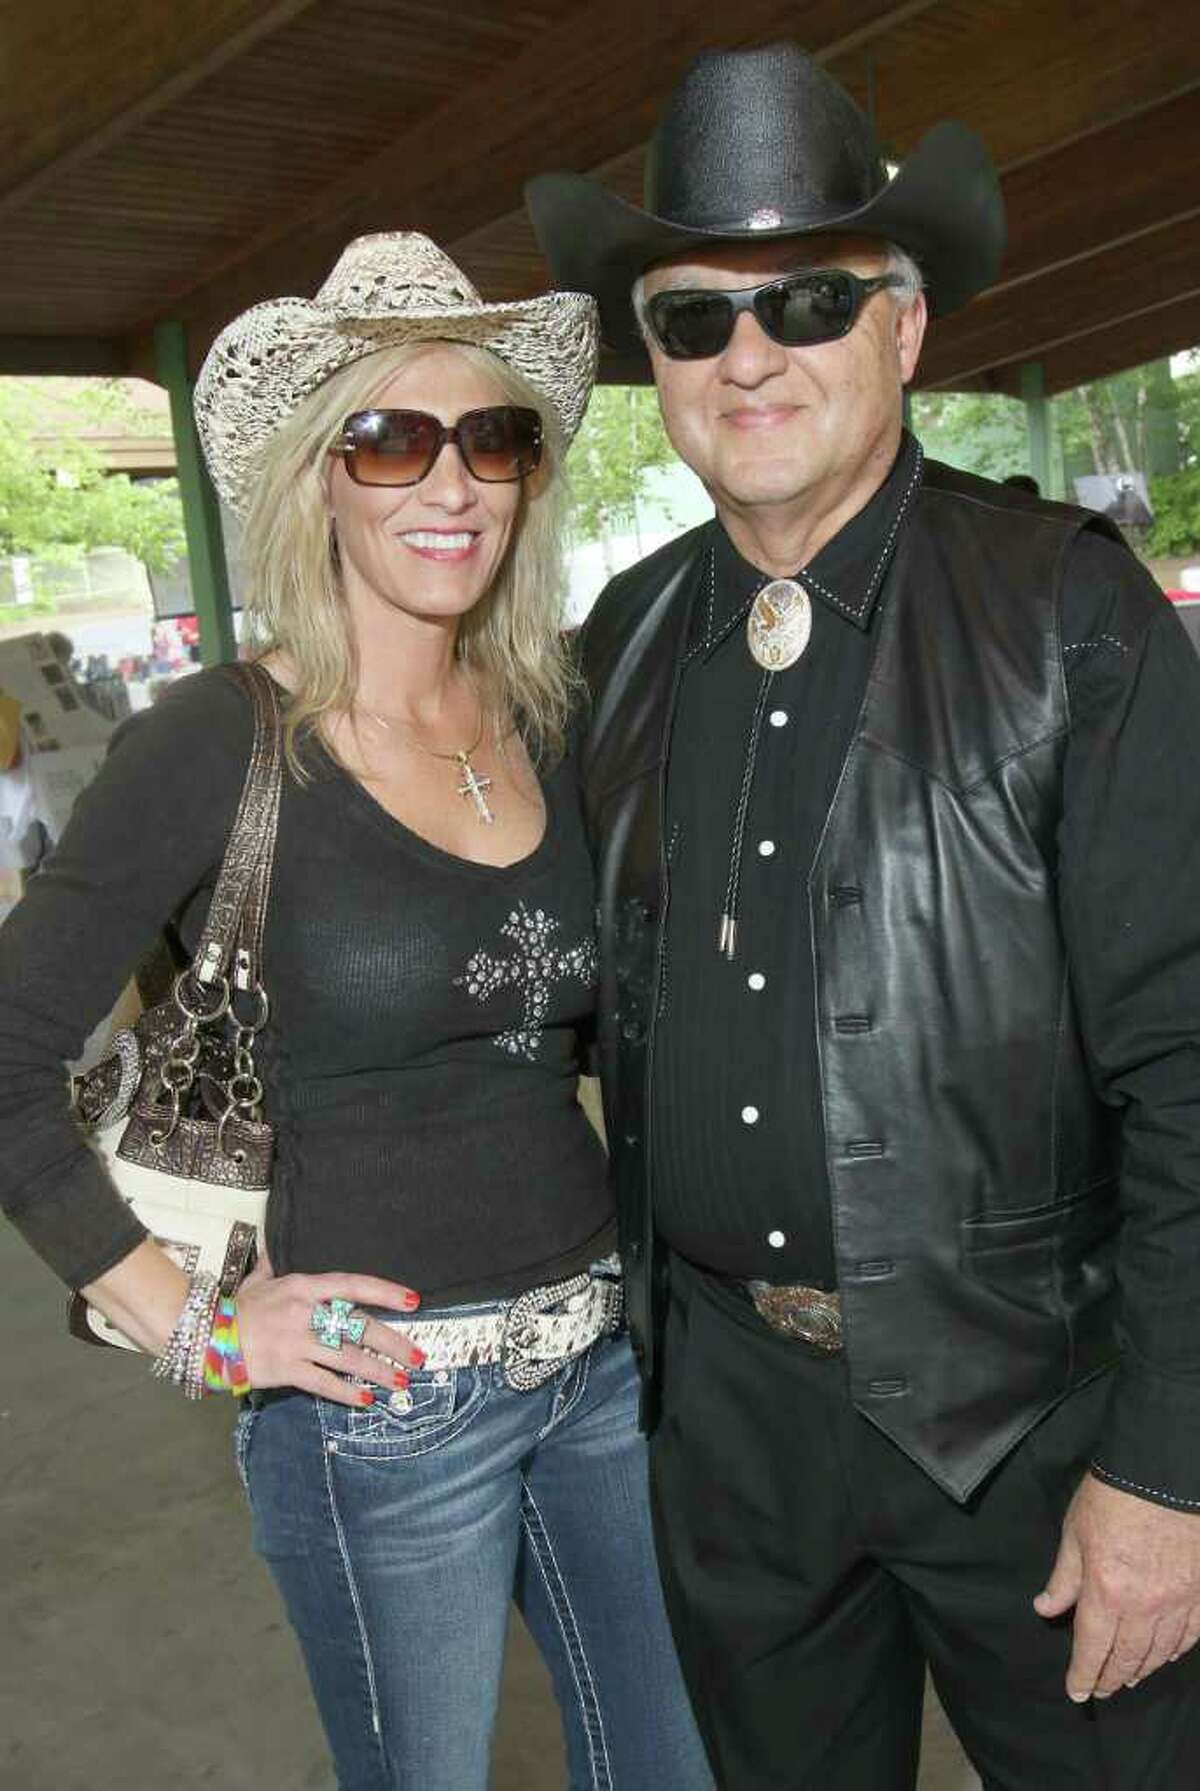 Lake George, NY - July 1, 2011 - (Photo by Joe Putrock/Special to the Times Union) - Patty Rich(left) and Vince Riggi(right) show off some of their best western wear at the Double H Ranch 20th Anniversary Gala.